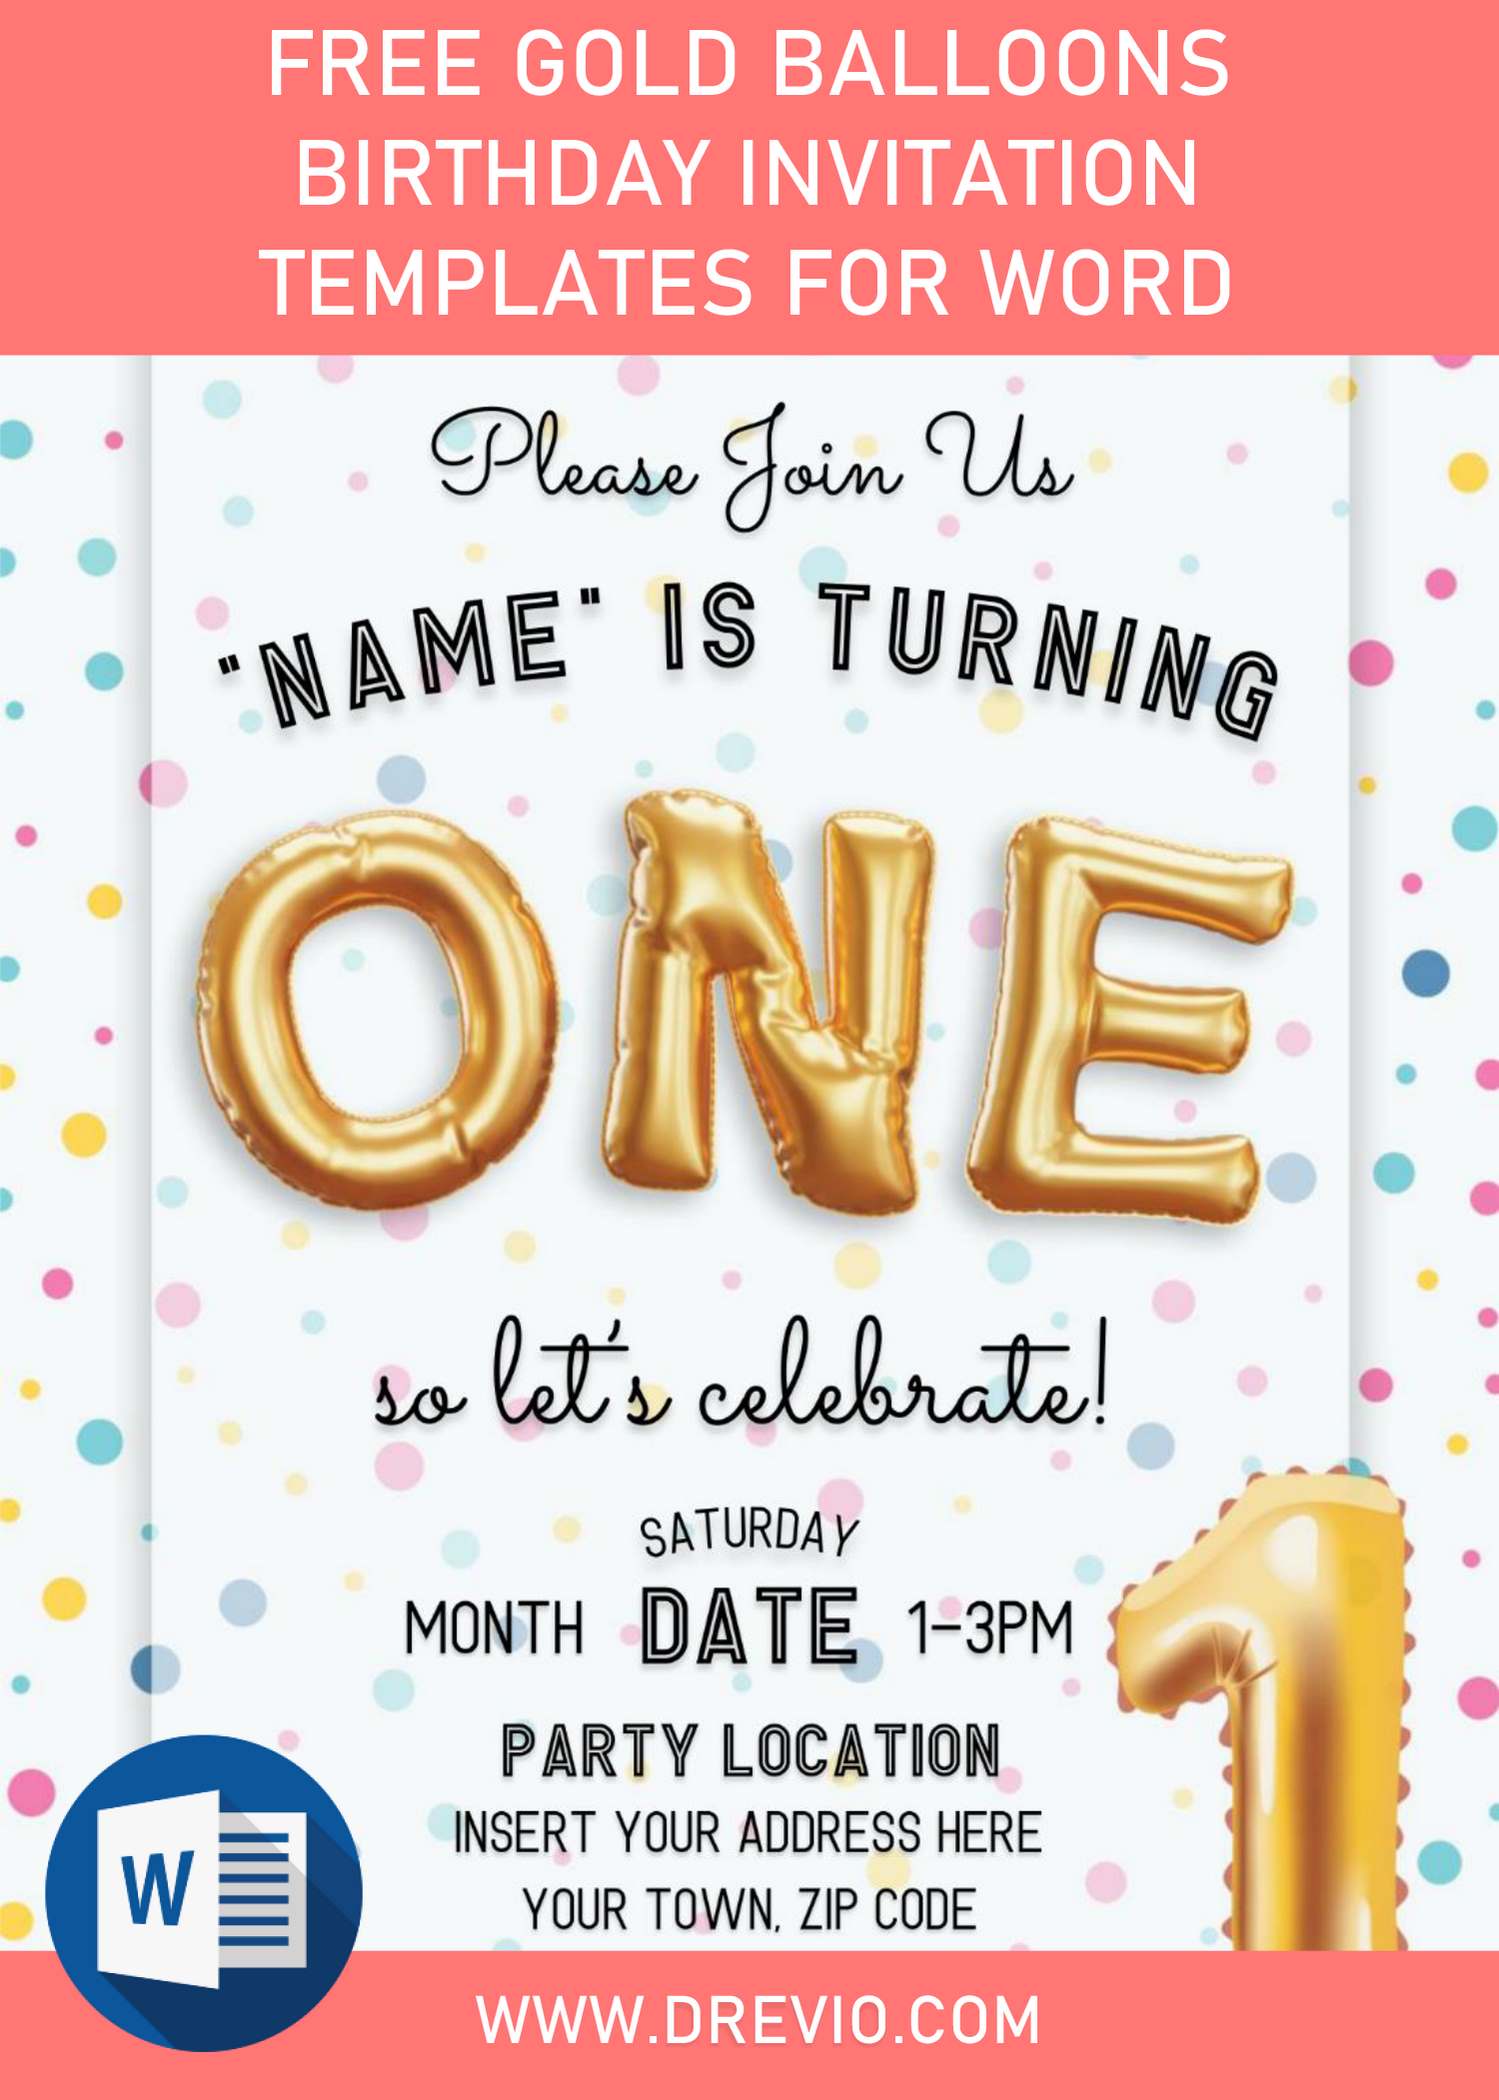 Free Gold Balloons Birthday Invitation Templates For Word